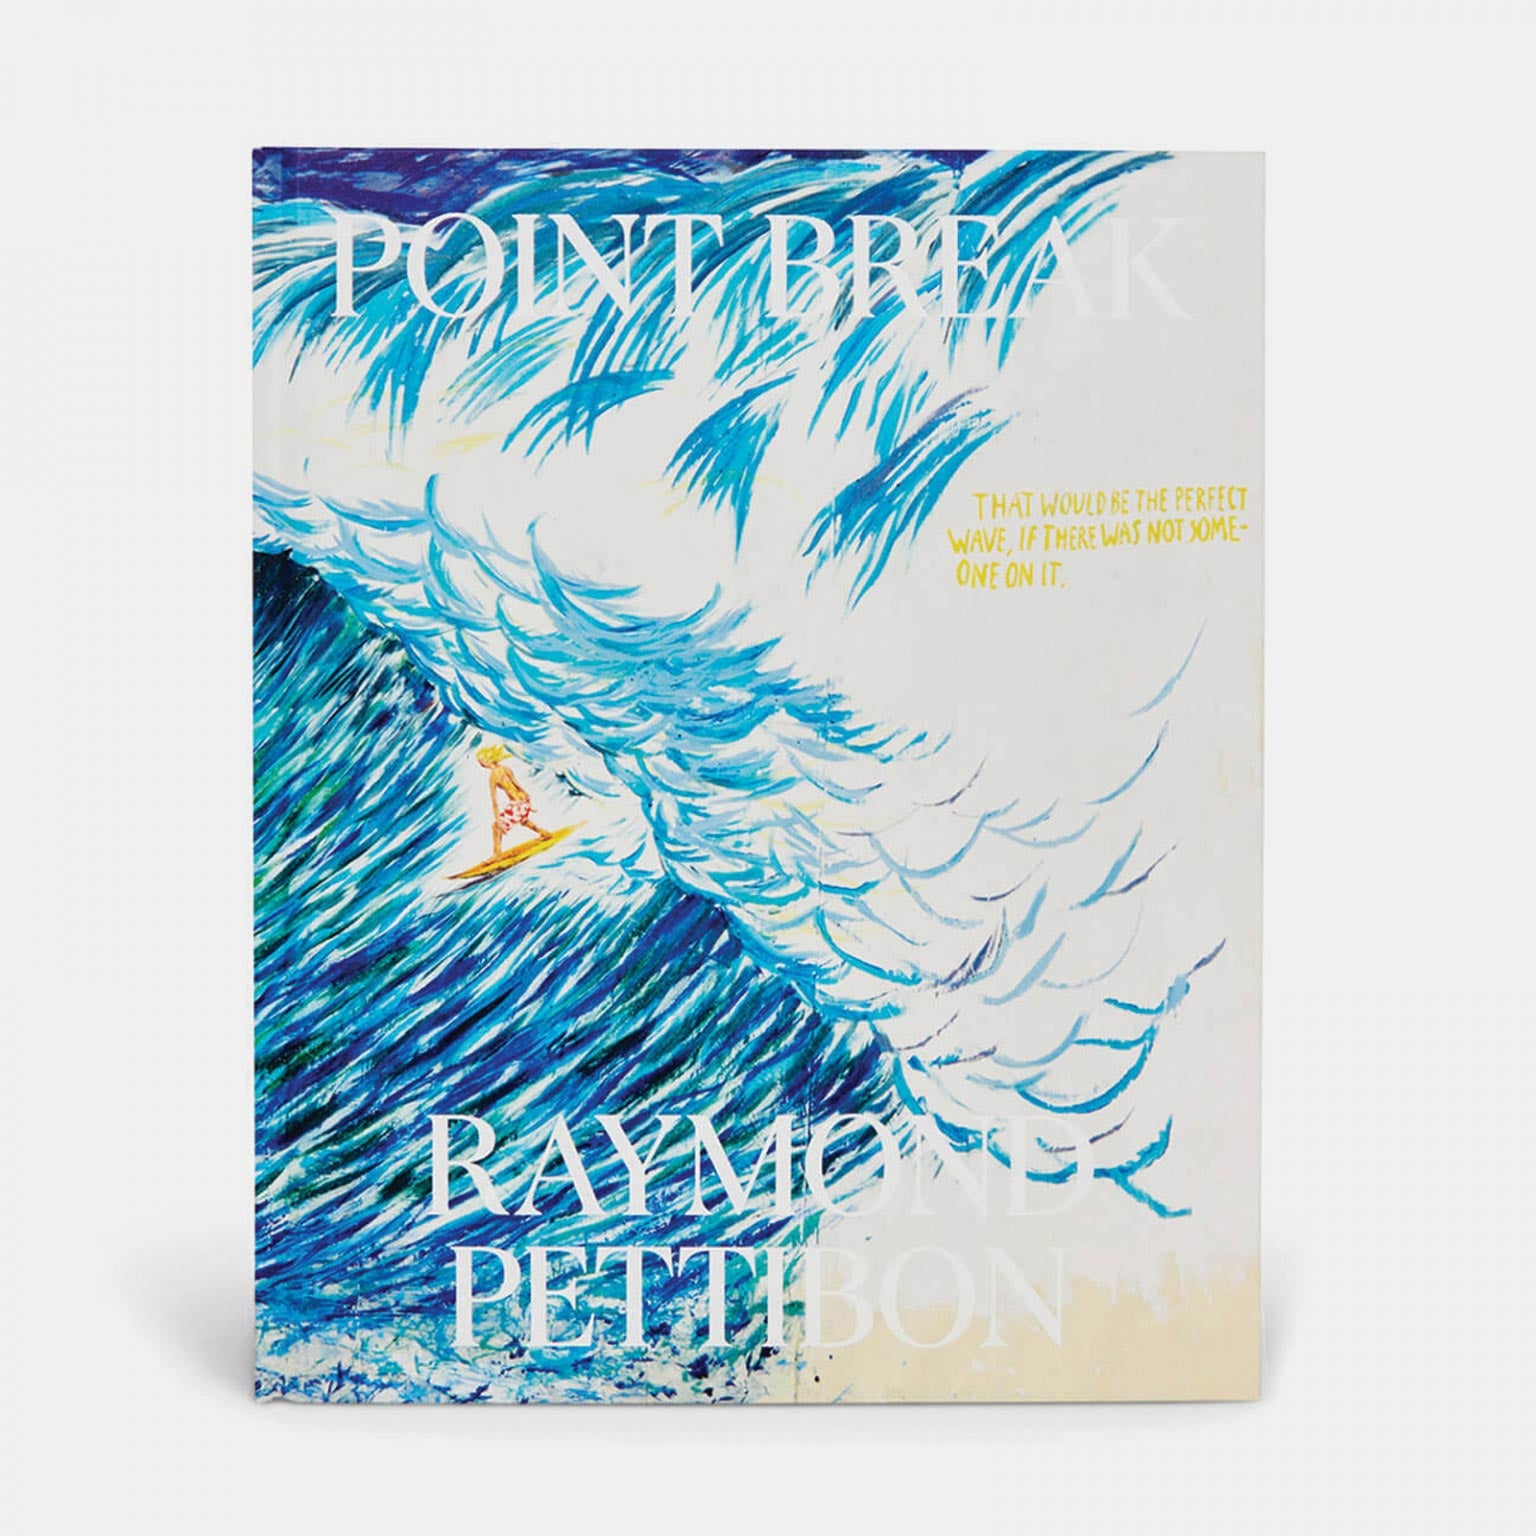 Raymond Pettibon - Point Break cover featuring a painting of a surfer riding immense blue waves.